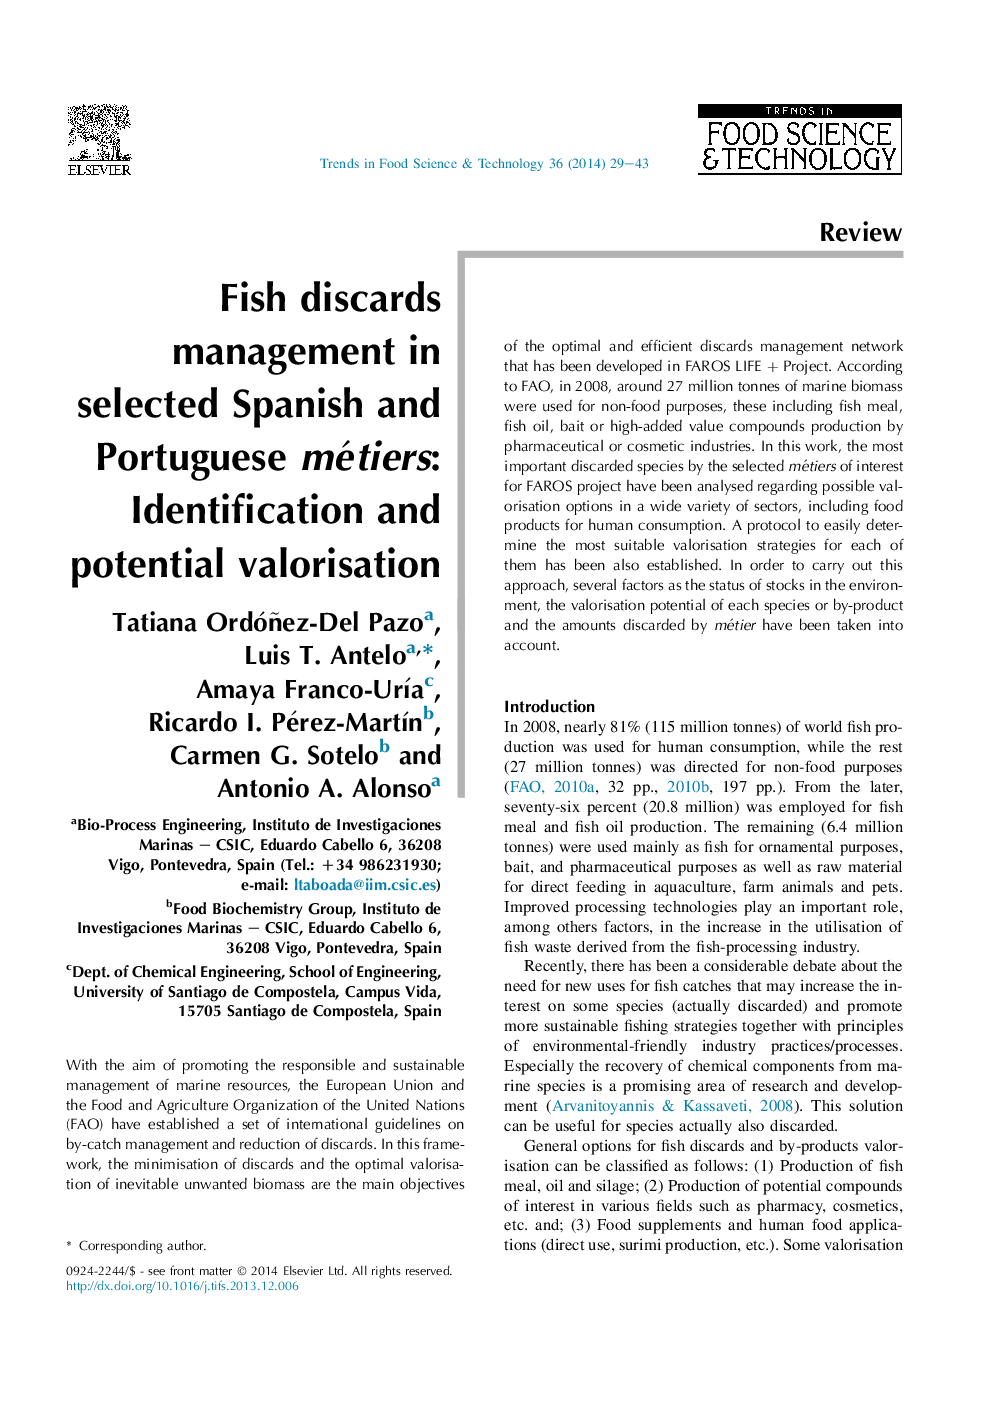 Fish discards management in selected Spanish and Portuguese métiers: Identification and potential valorisation